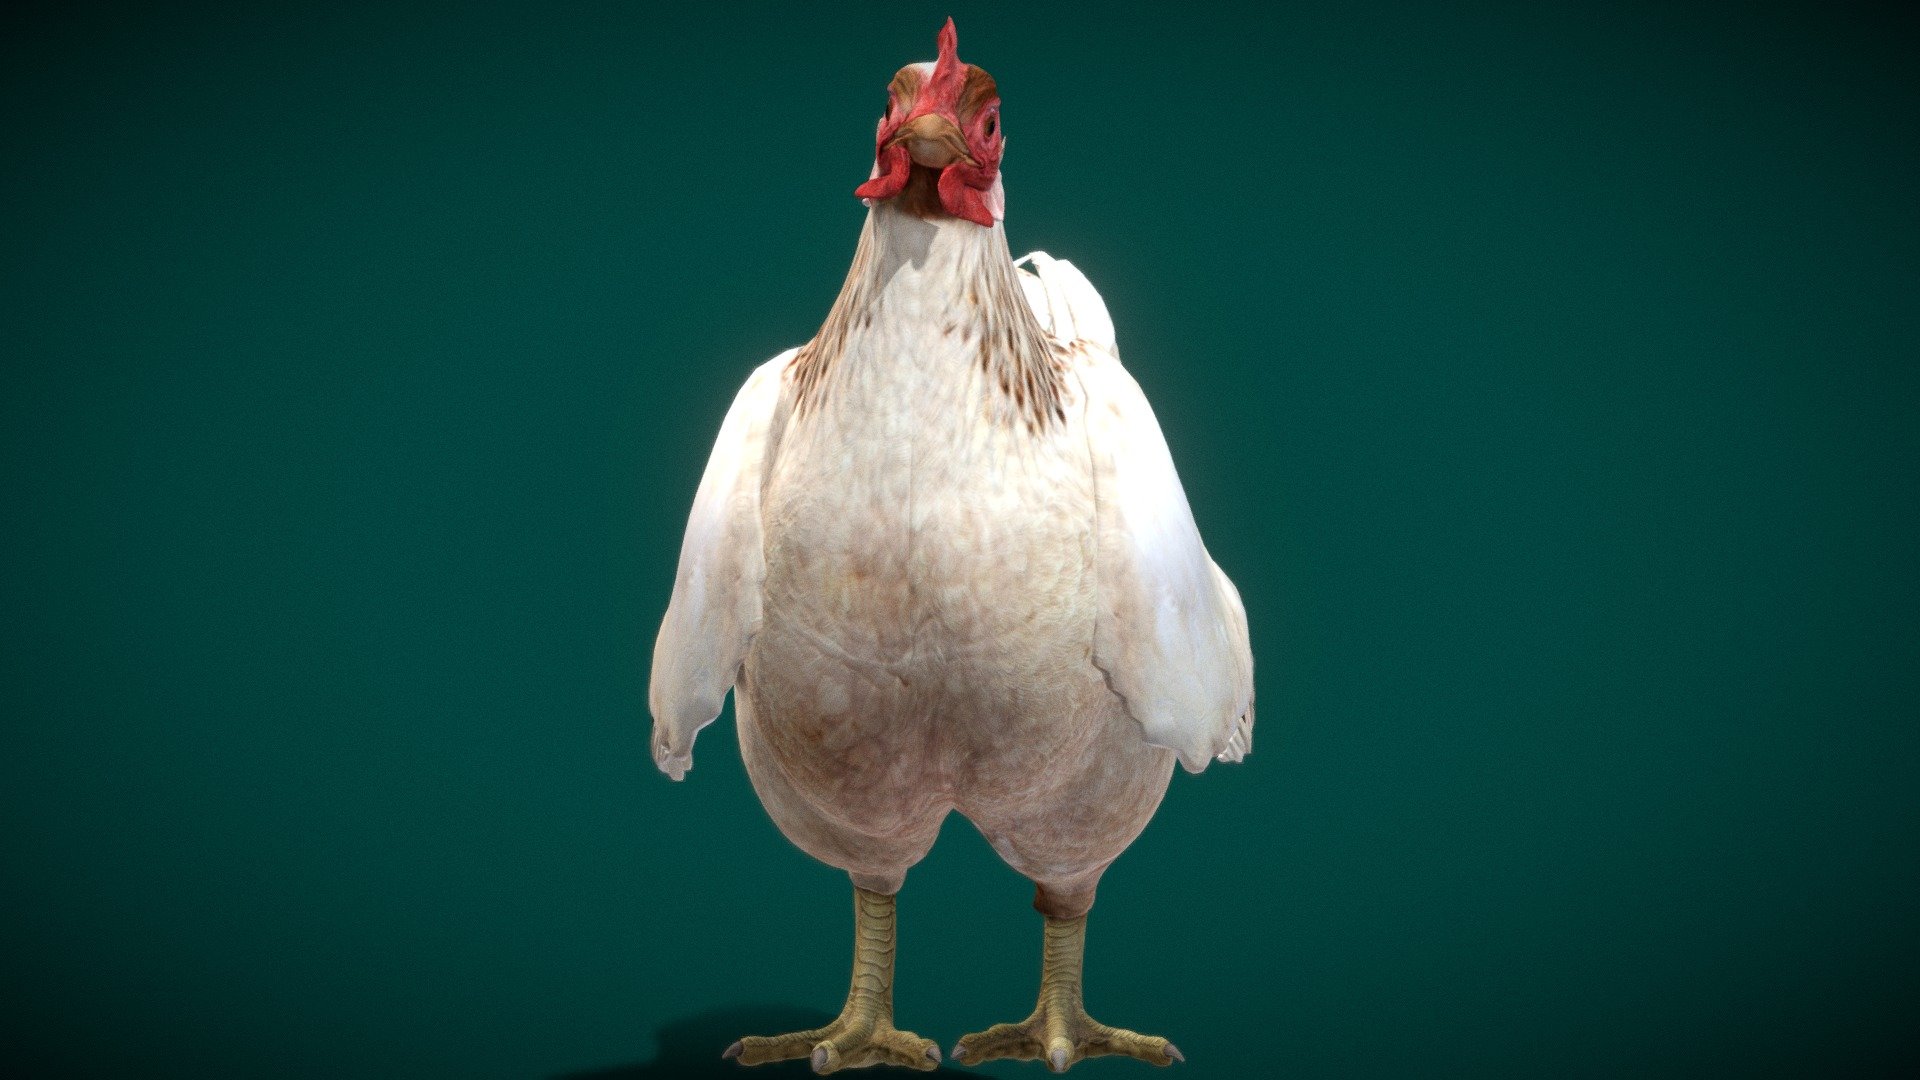 **Gallus_gallus_domesticus

White Hen  Animal Birds (Chicken)

Game Ready

5 Animations

4K PBR Textures Material

Unreal ,Unity FBX File (2018)(Seperate file + All)

Blend File 

USDZ File (AR Ready). Real Scale Dimension

Textures Files

GLB File

Gltf File ( Spark AR, Lens Studio , Effector , Spline, Play Canvas ) Compatible**

The chicken is a domesticated species that arose from the red junglefowl, originally from India. They have also partially hybridized with other wild species of junglefowl. Rooster and cock are terms for adult male birds, and a younger male may be called a cockerel. A male that has been castrated is a capon. Wikipedia
Scientific name: Gallus_gallus_domesticus
Domain: Eukaryota
Family: Phasianidae
Kingdom: Animalia
Order: Galliformes
Phylum: Chordata - Hen The Chick (Game Redy) - 3D model by Nyilonelycompany 3d model